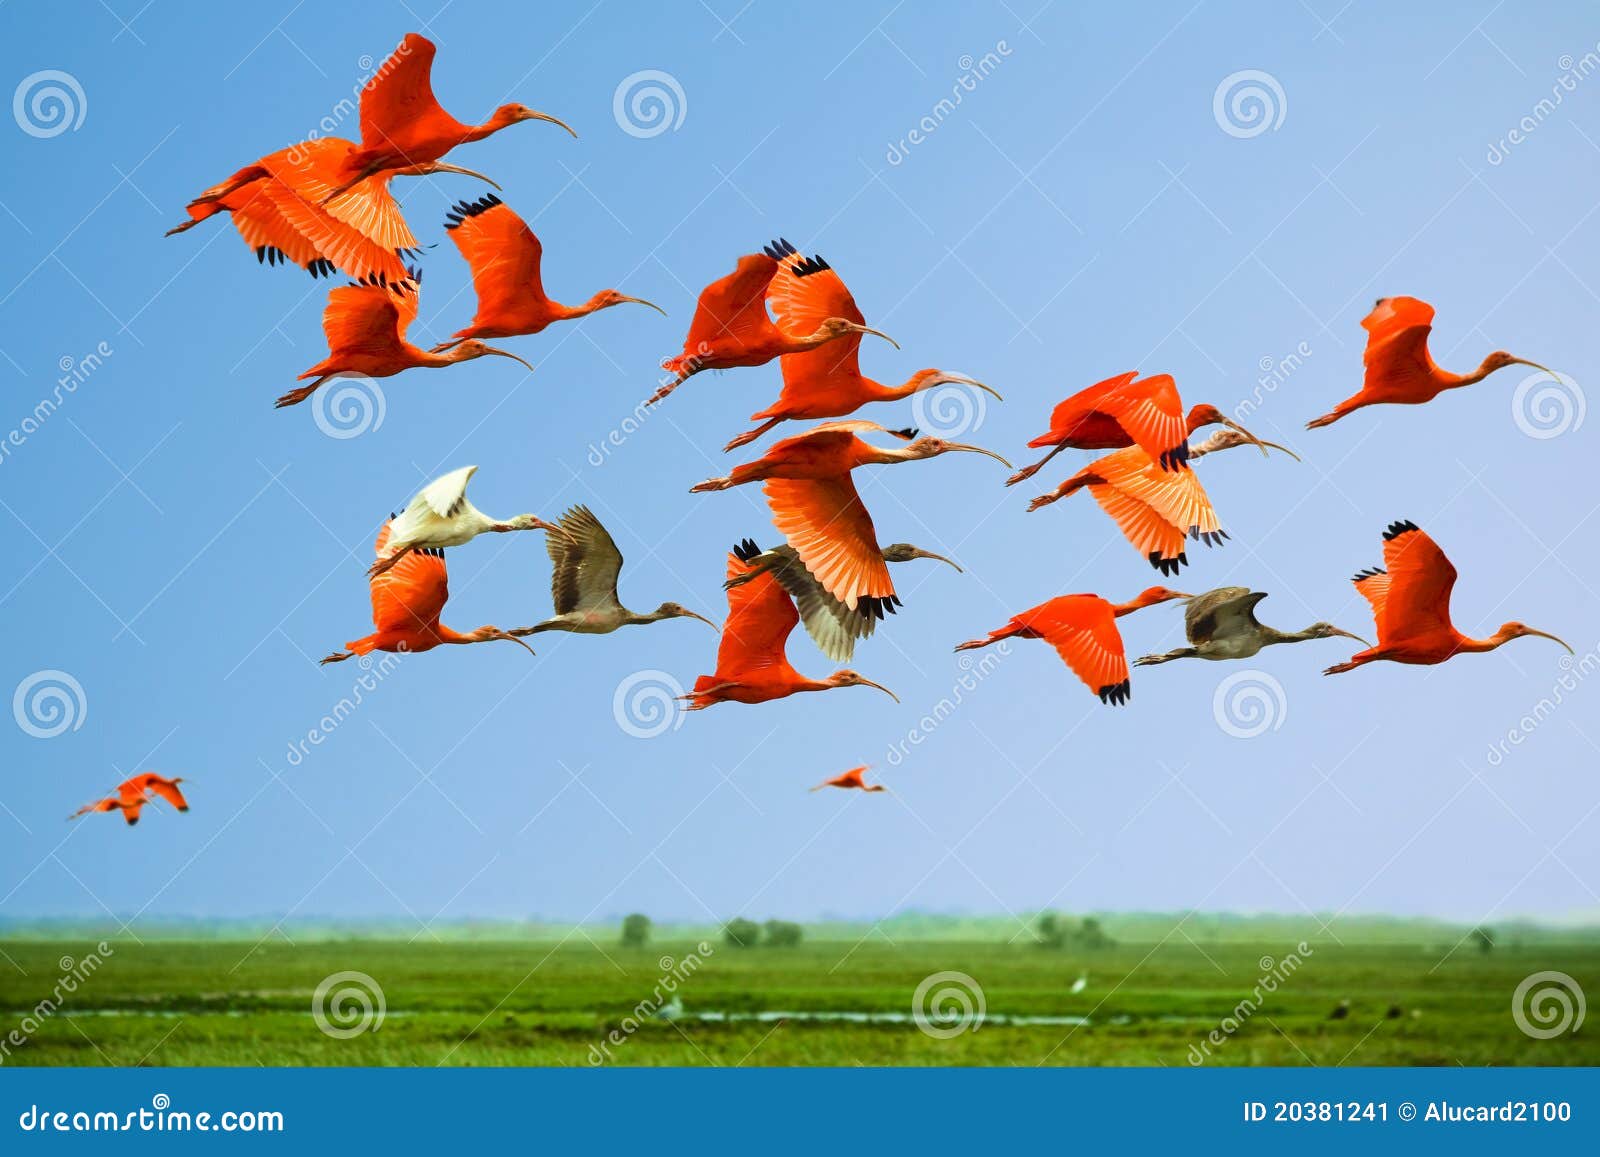 flock of scarlet and white ibises in flight above green meadow with blue sky background (flying birds)